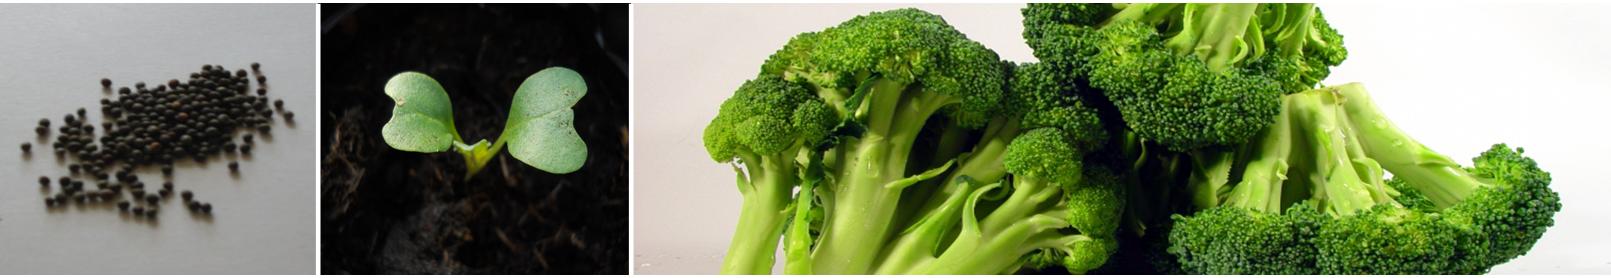 From Seed to Harvest: Witness the Broccoli Growth Journey with Royal Seed - Starting from Seedling to Fresh Produce